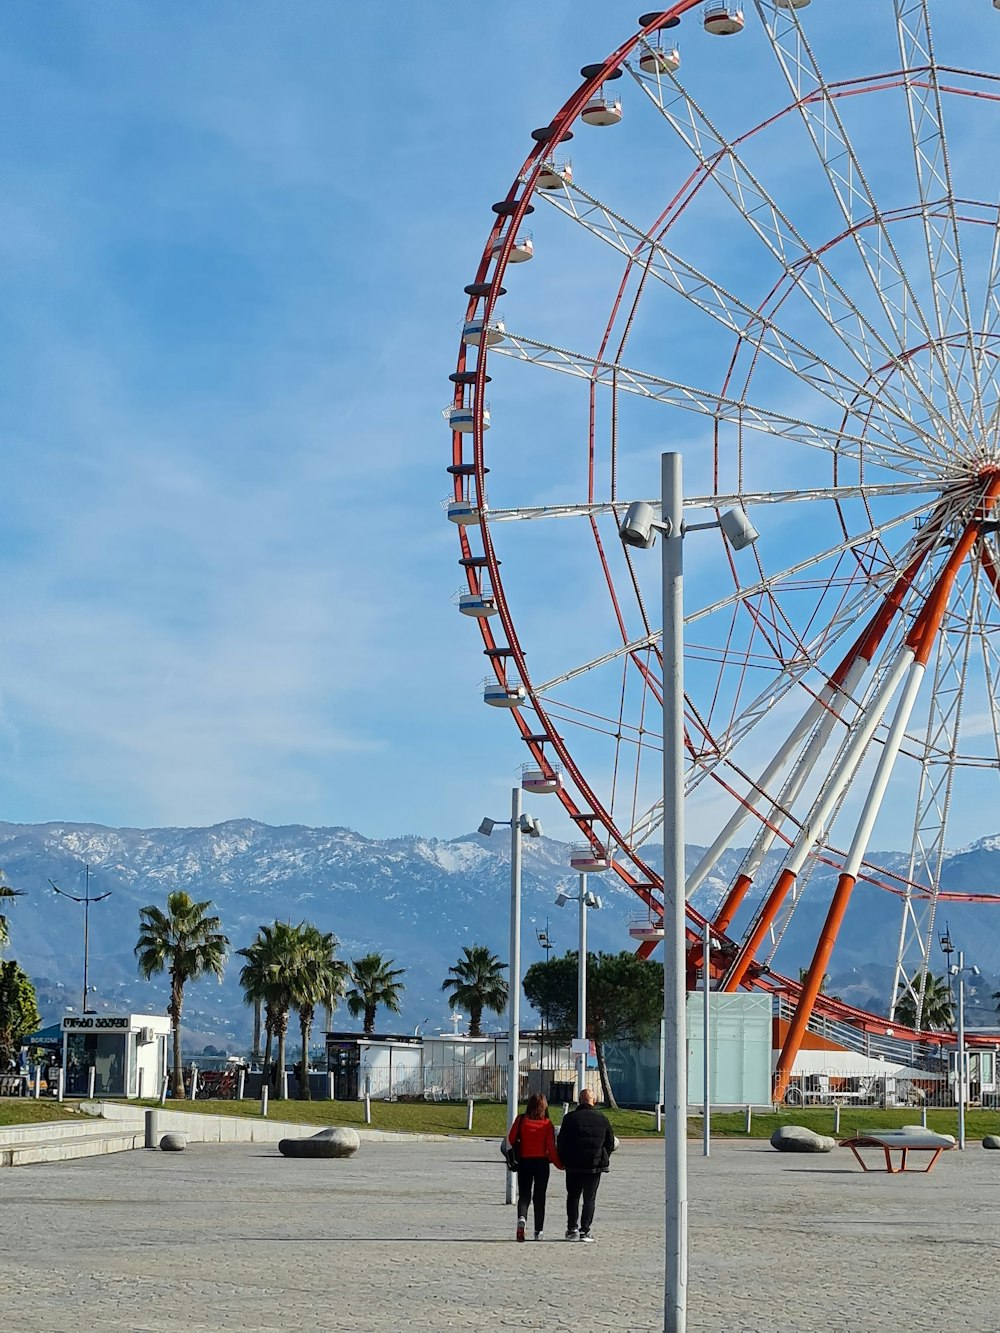 a ferris wheel in a park with mountains in the background